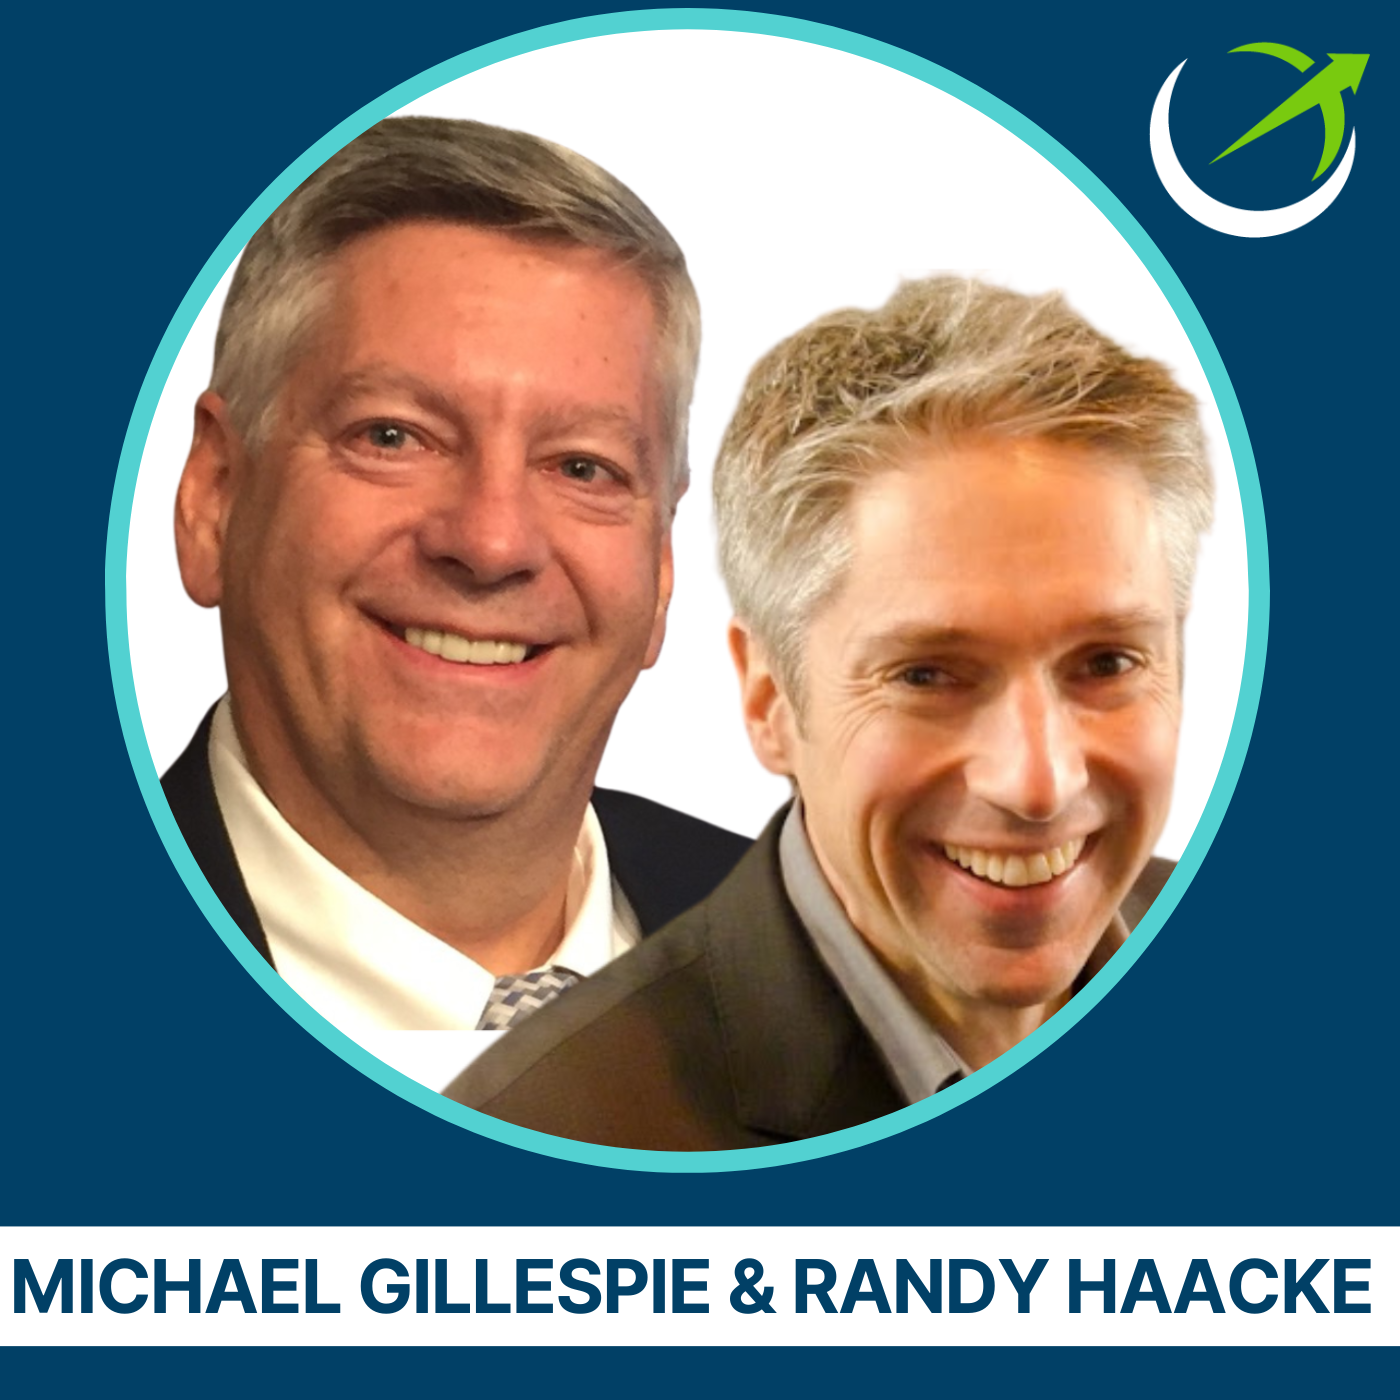 Walking Towards Change: Michael Gillespie and Randy Haacke of World Vision On Making A Global Impact.